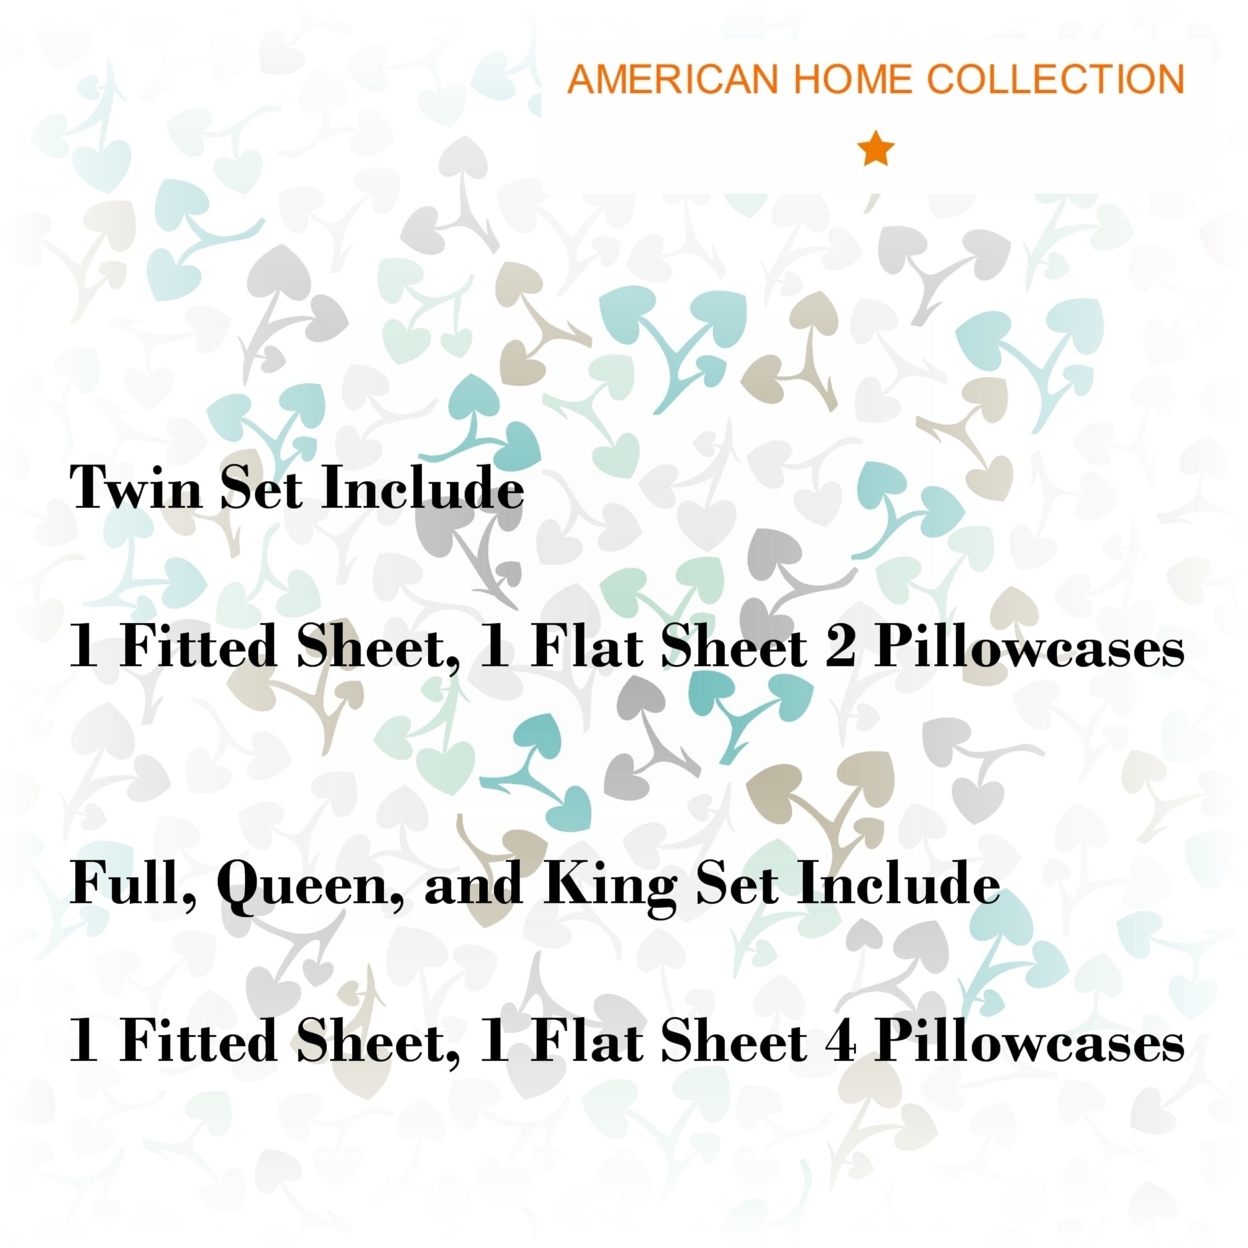 American Home Collection Ultra Soft 4-6 Piece Heart Leaf Romance Printed Bed Sheet Set - King